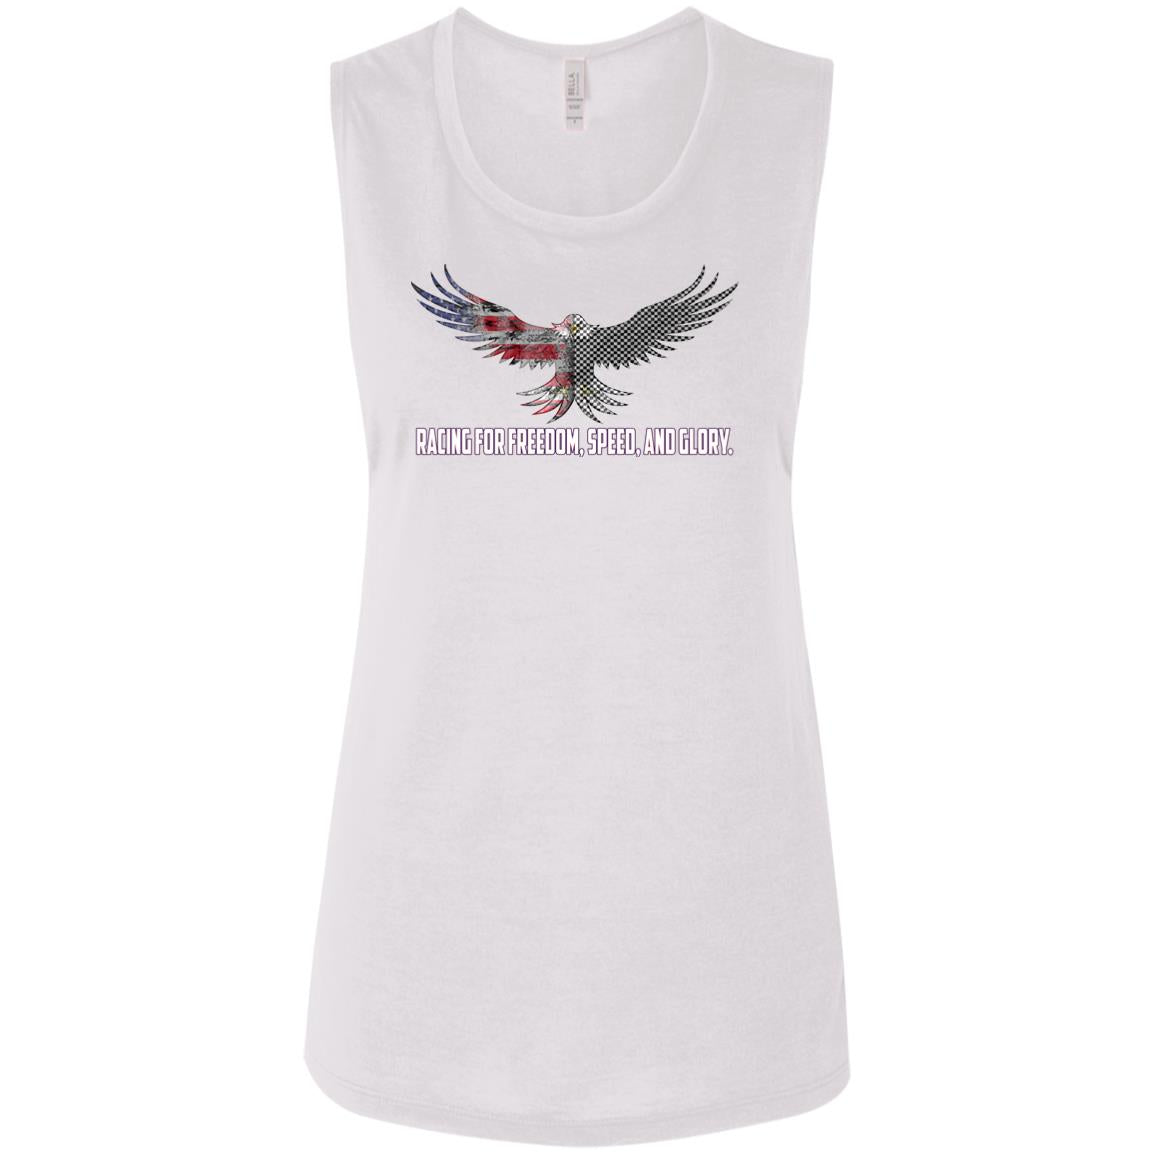 Racing For Freedom, Speed, And Glory Ladies' Flowy Muscle Tank